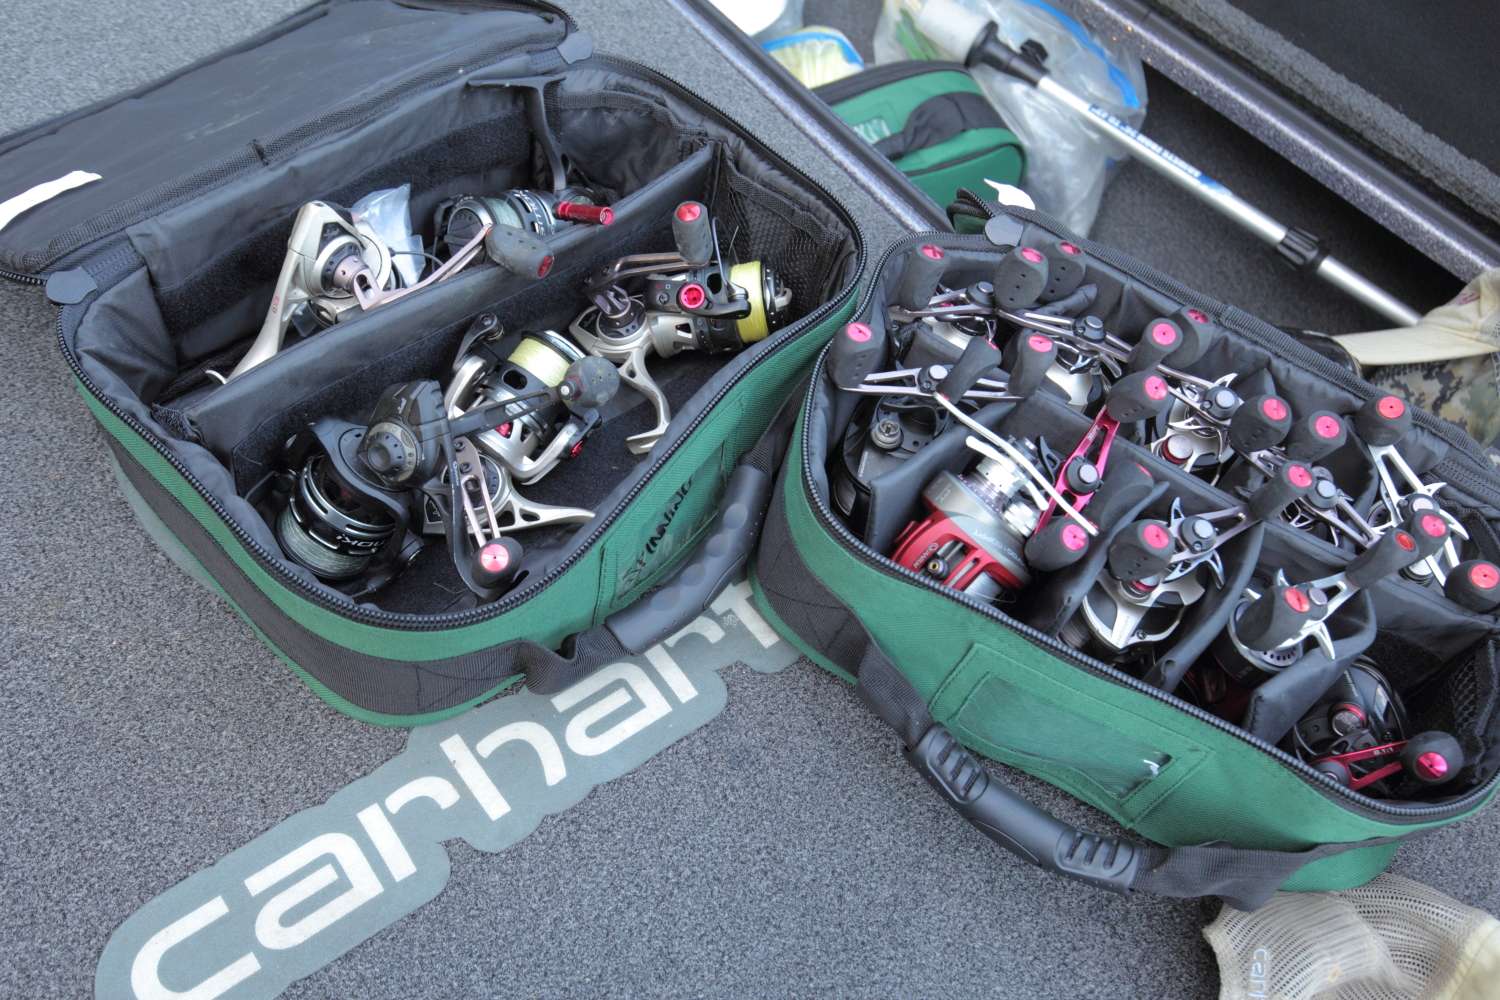 A lot of the rods Lee stores in his rod locker don't have reels on them, so he keeps these reels in a separate compartment.